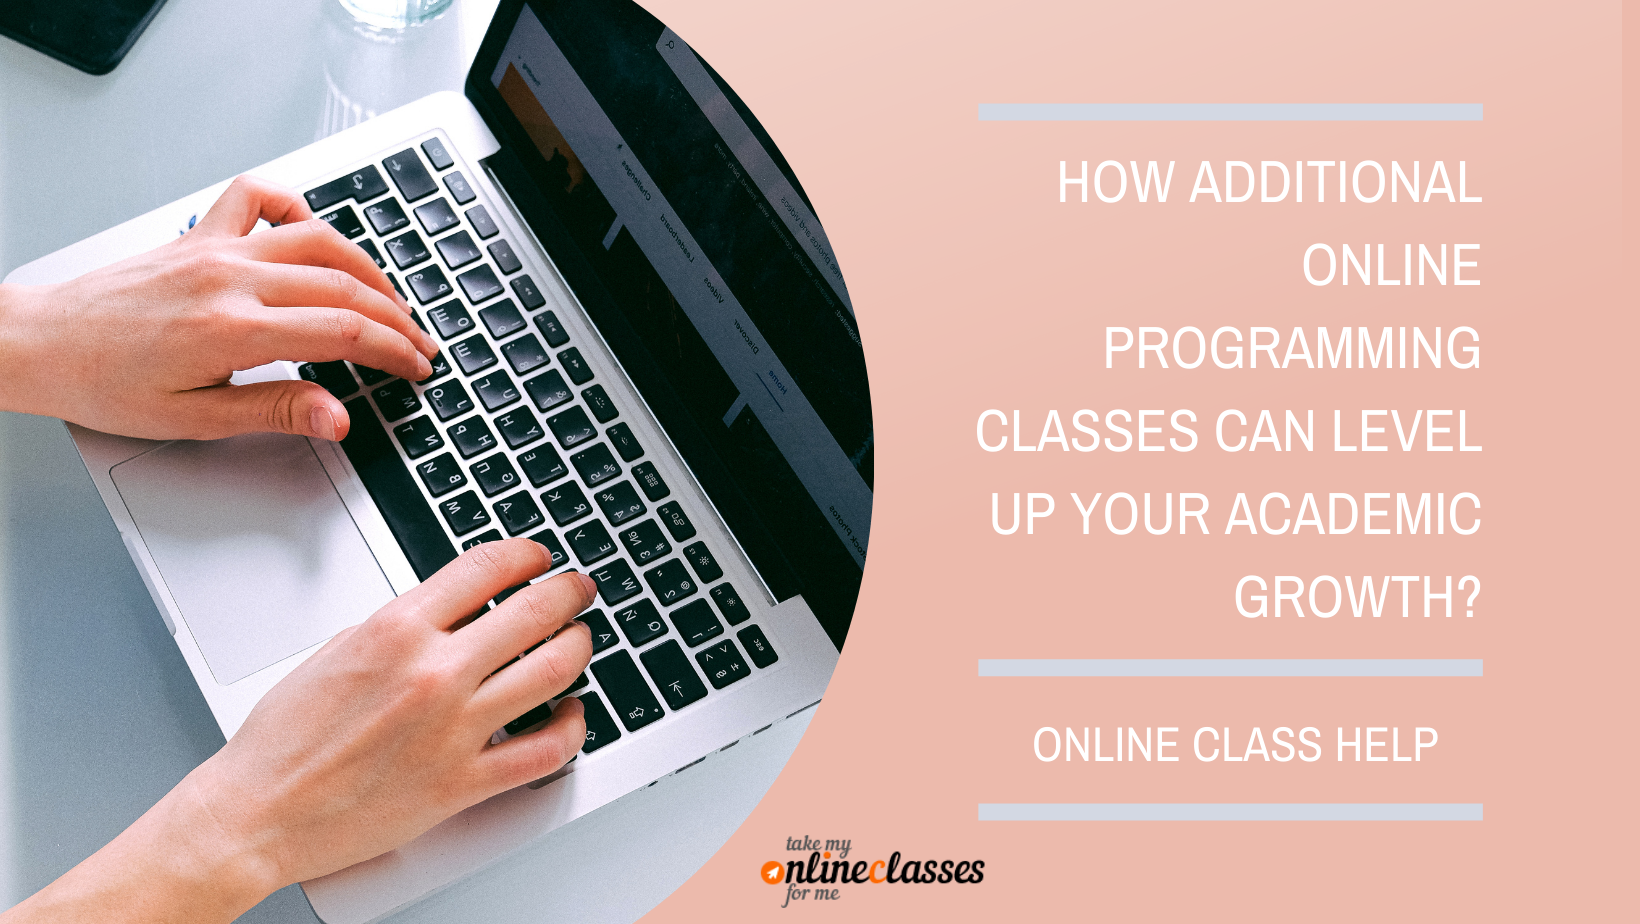 How Additional Online Programming Classes Can Level Up Your Academic Growth?